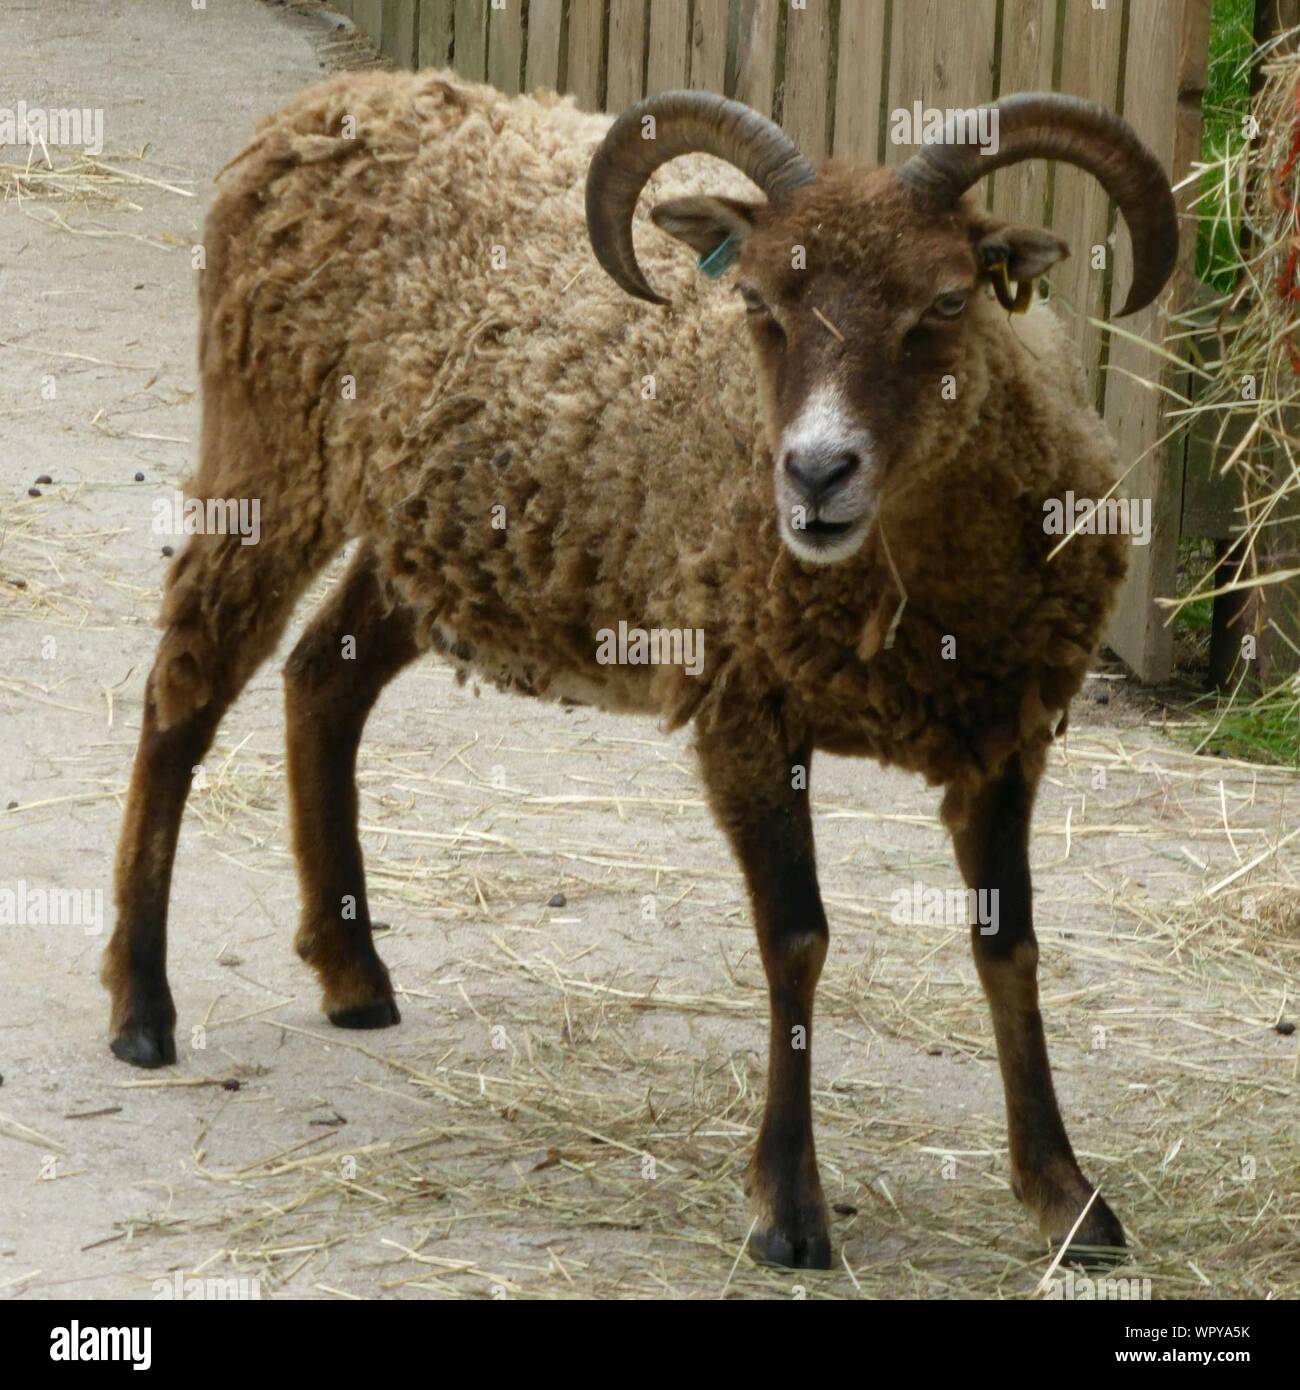 Horned Sheep Standing At Yard Stock Photo